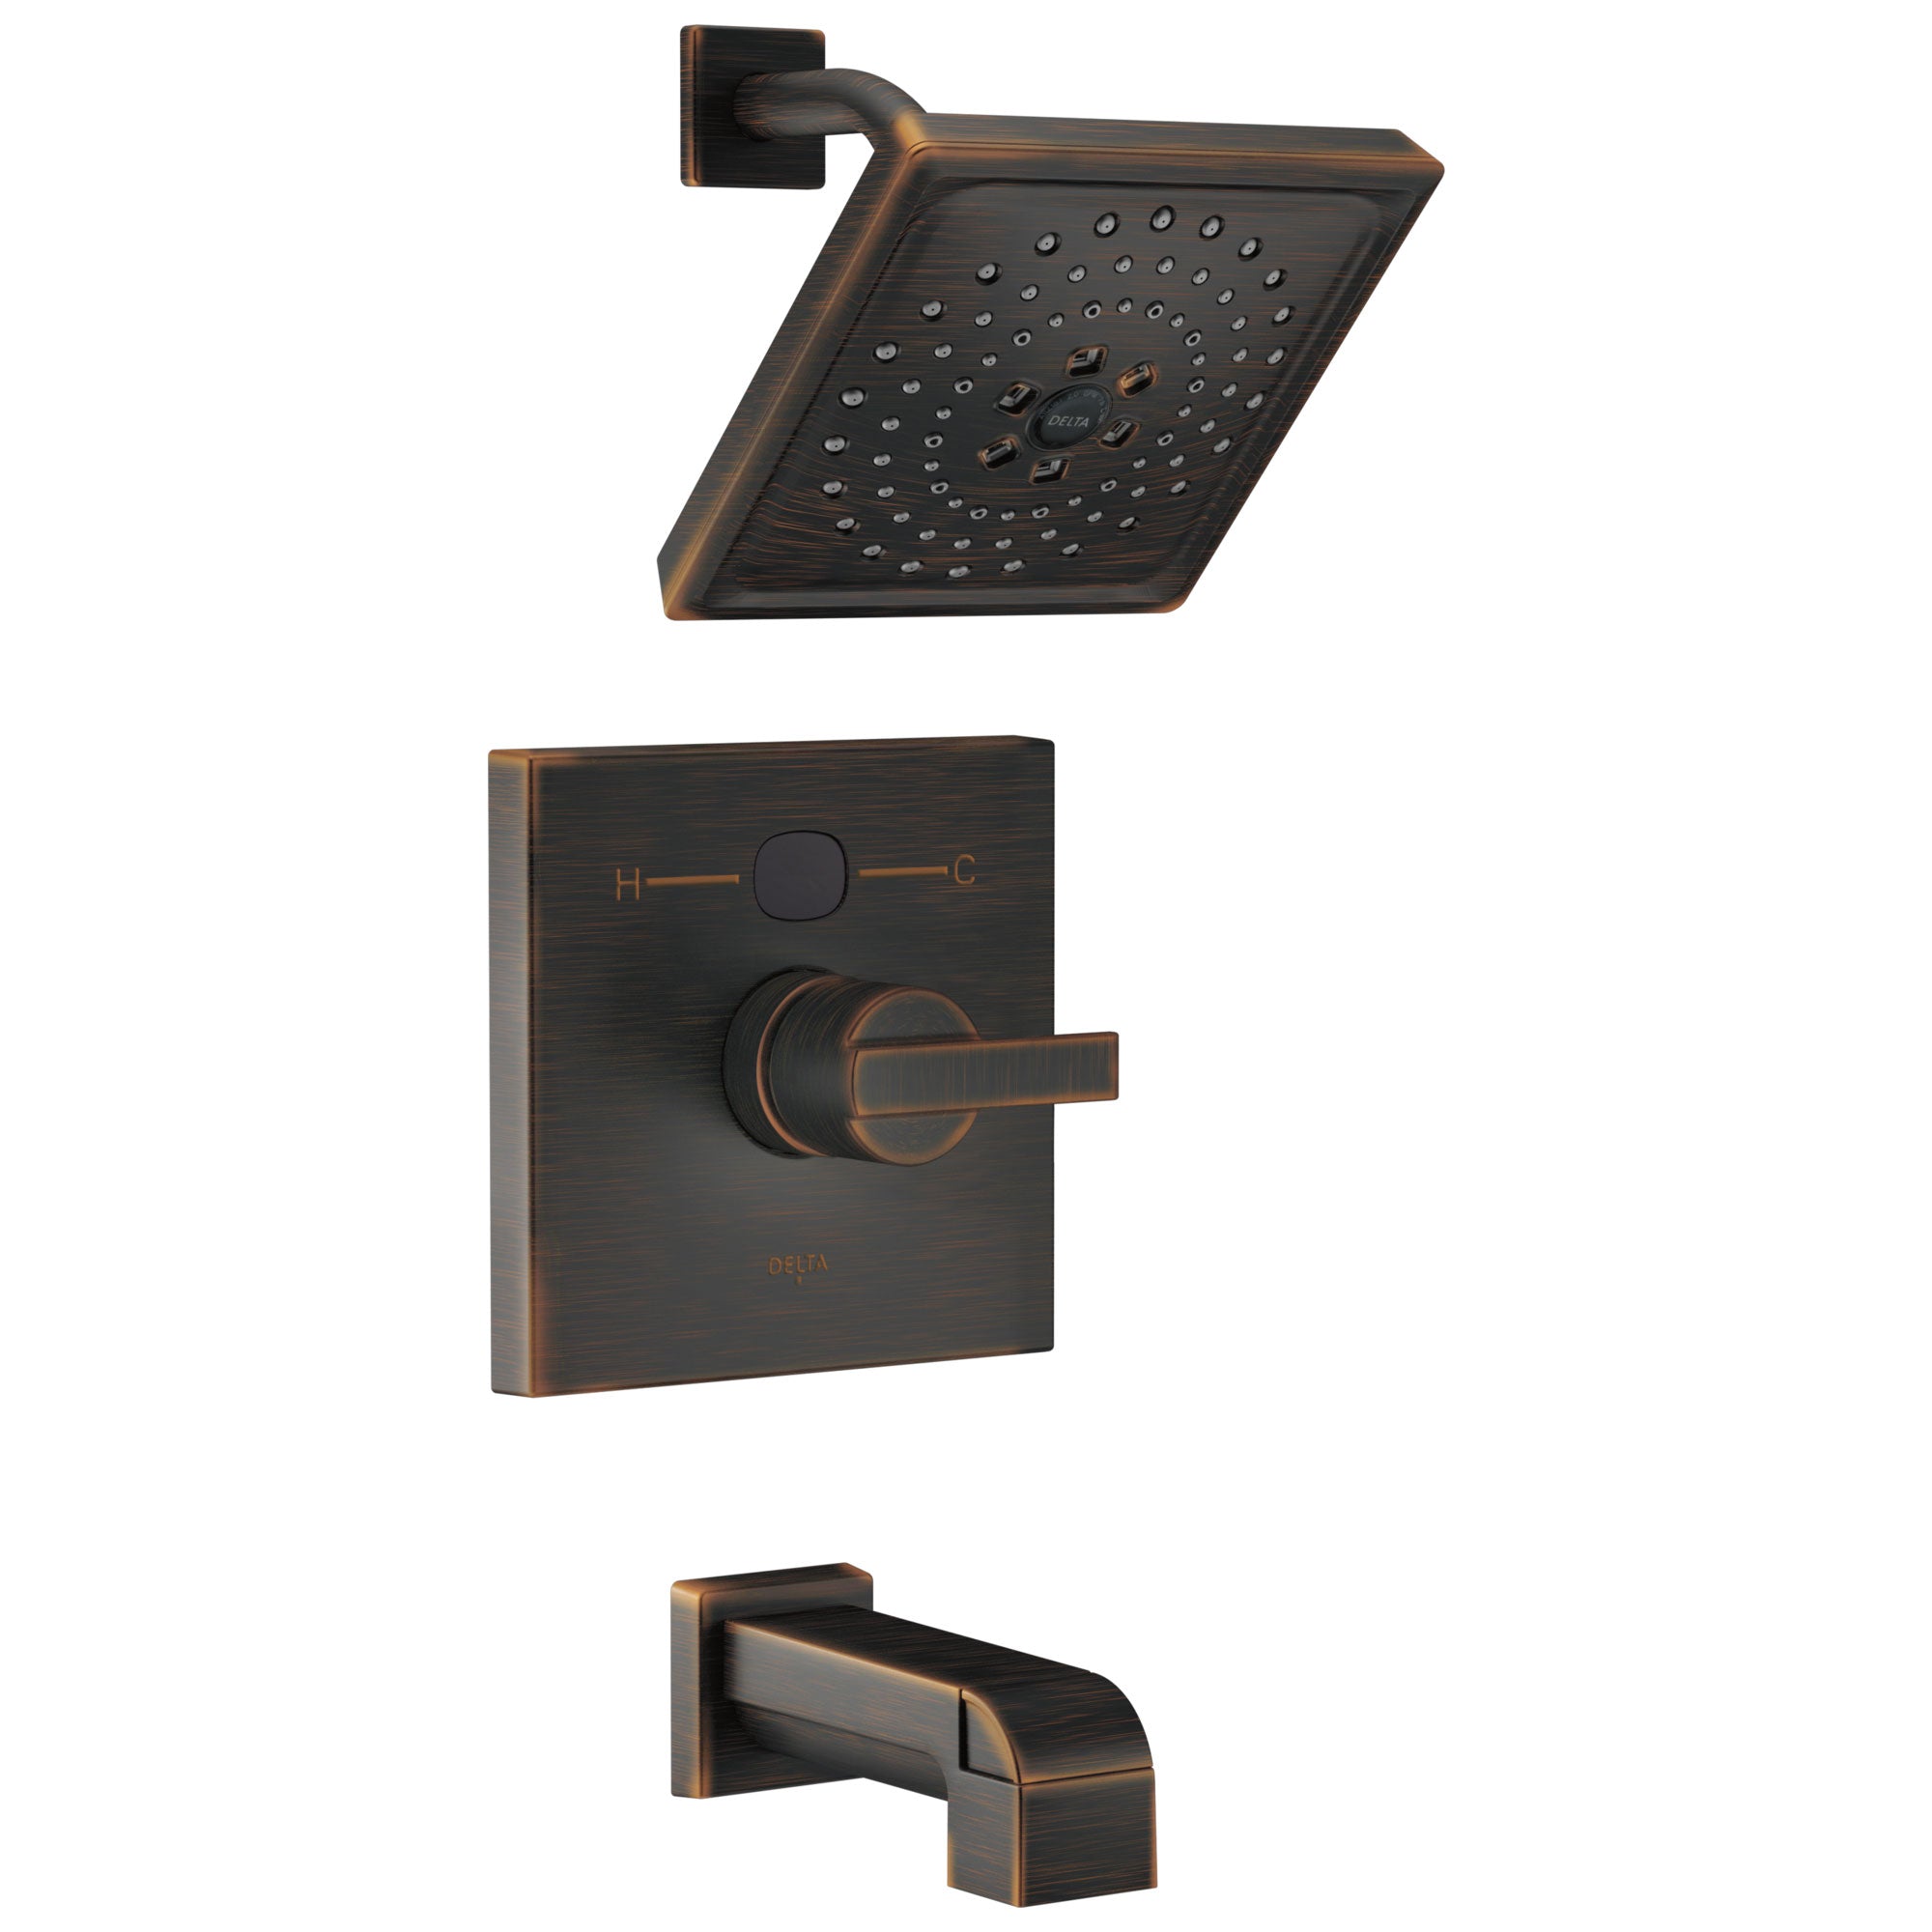 Delta Venetian Bronze Ara Angular Modern 14 Series Digital Display Temp2O One Handle Tub and Shower Combination Faucet Includes Rough-in Valve with Stops D2011V